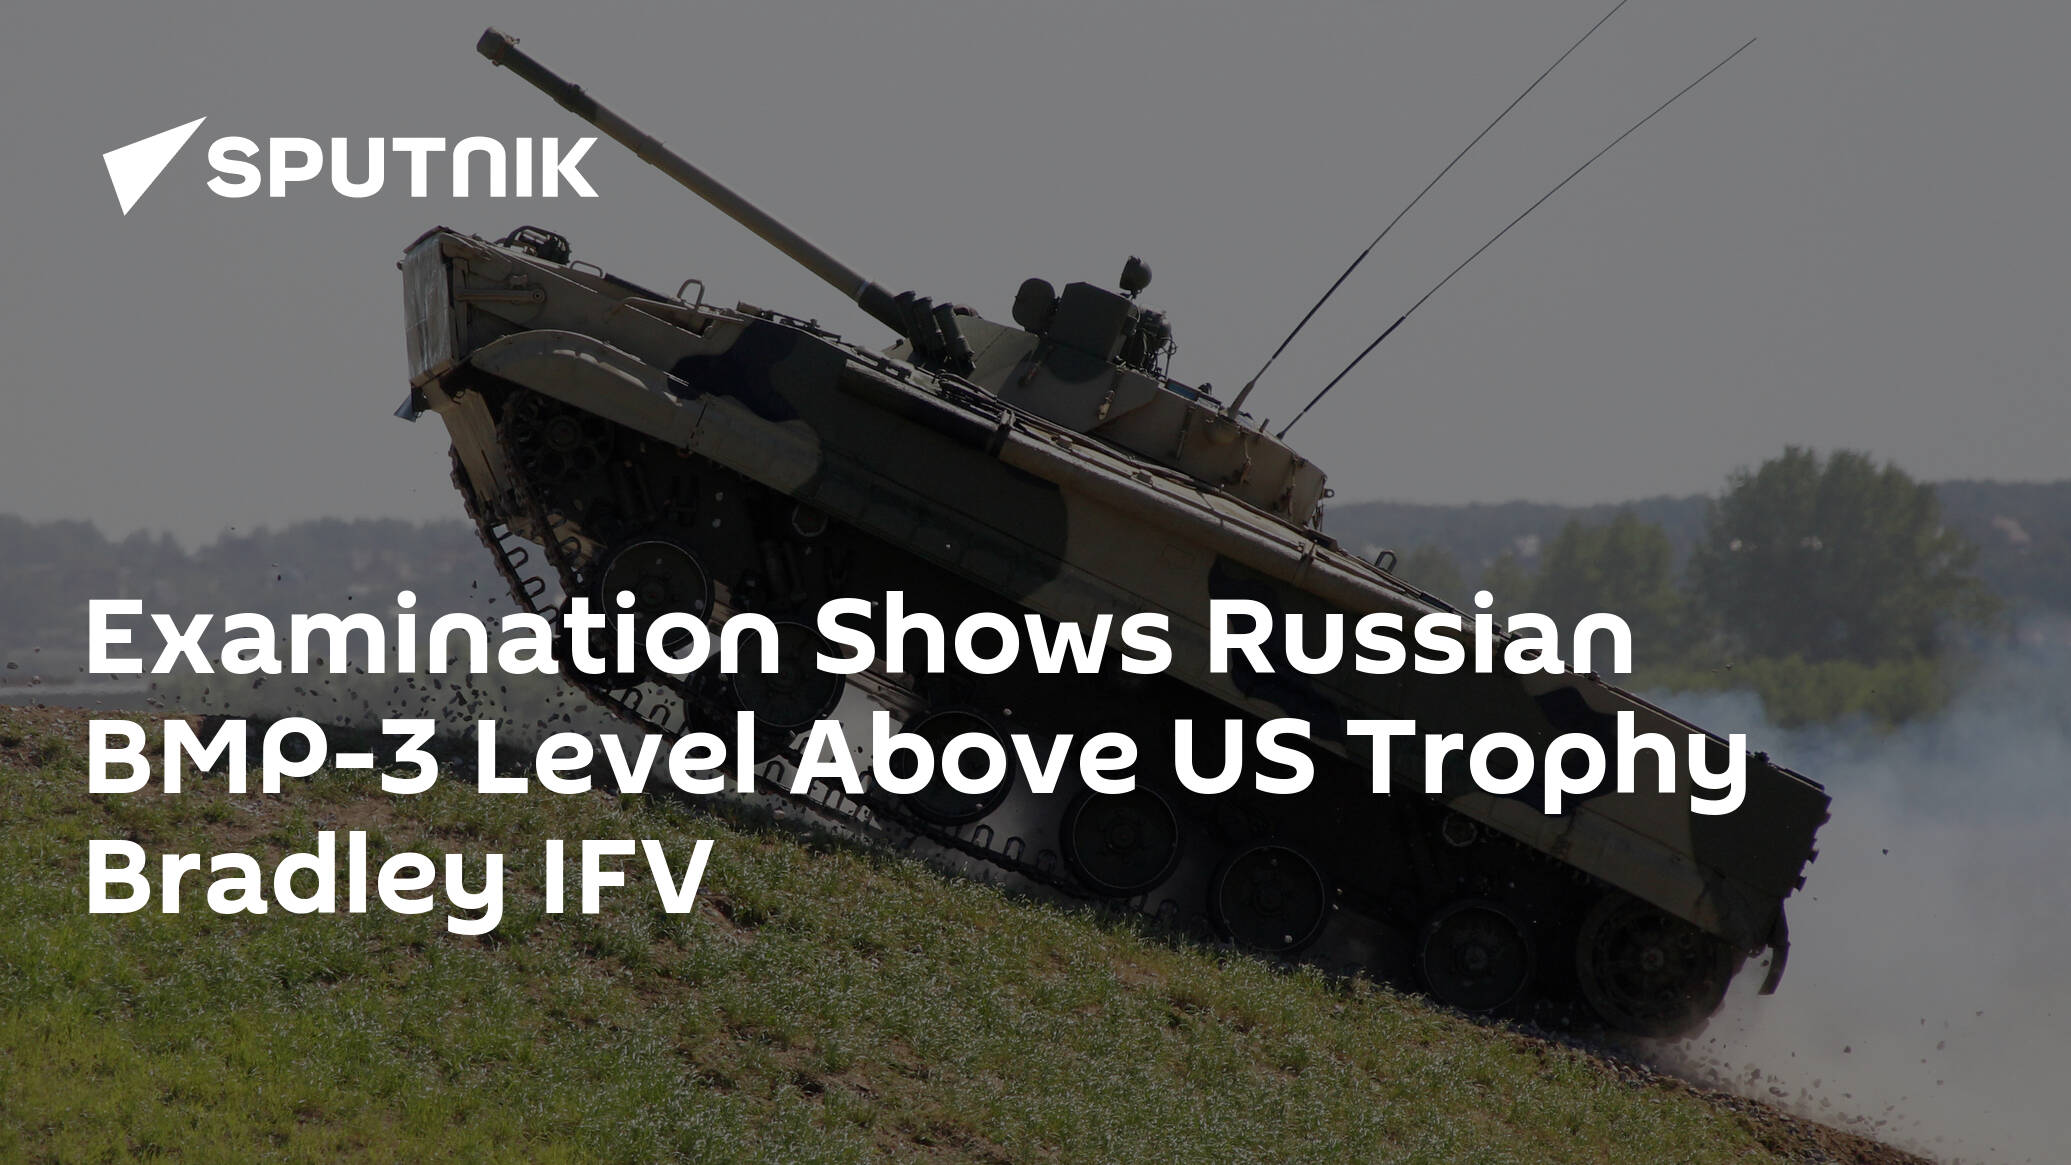 Examination Shows Russian BMP-3 Level Above US Trophy Bradley IFV